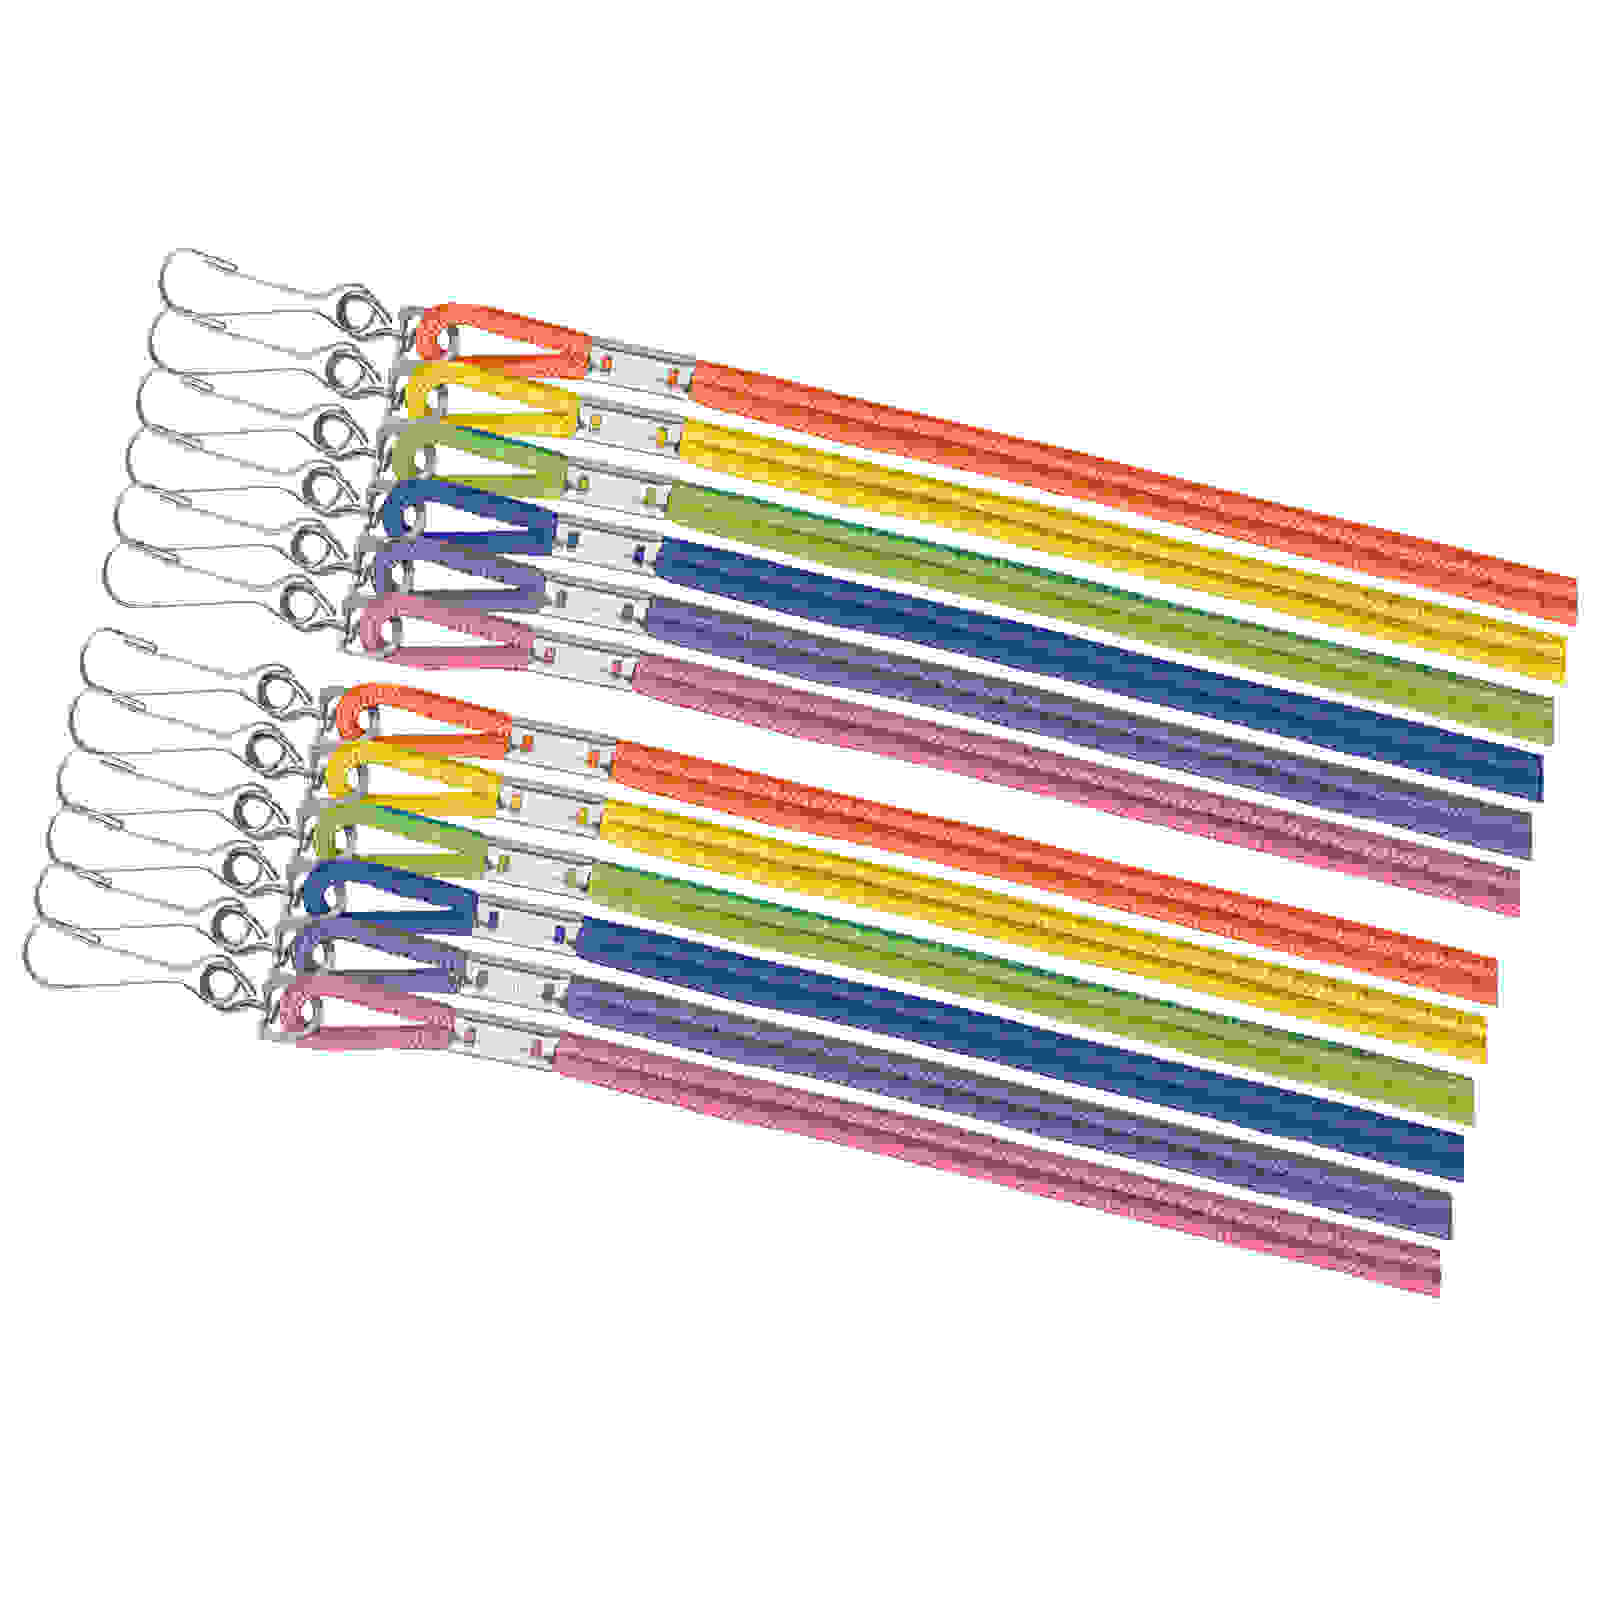 Heavy Duty Nylon Lanyard, Assorted Neon Colors, Pack of 6